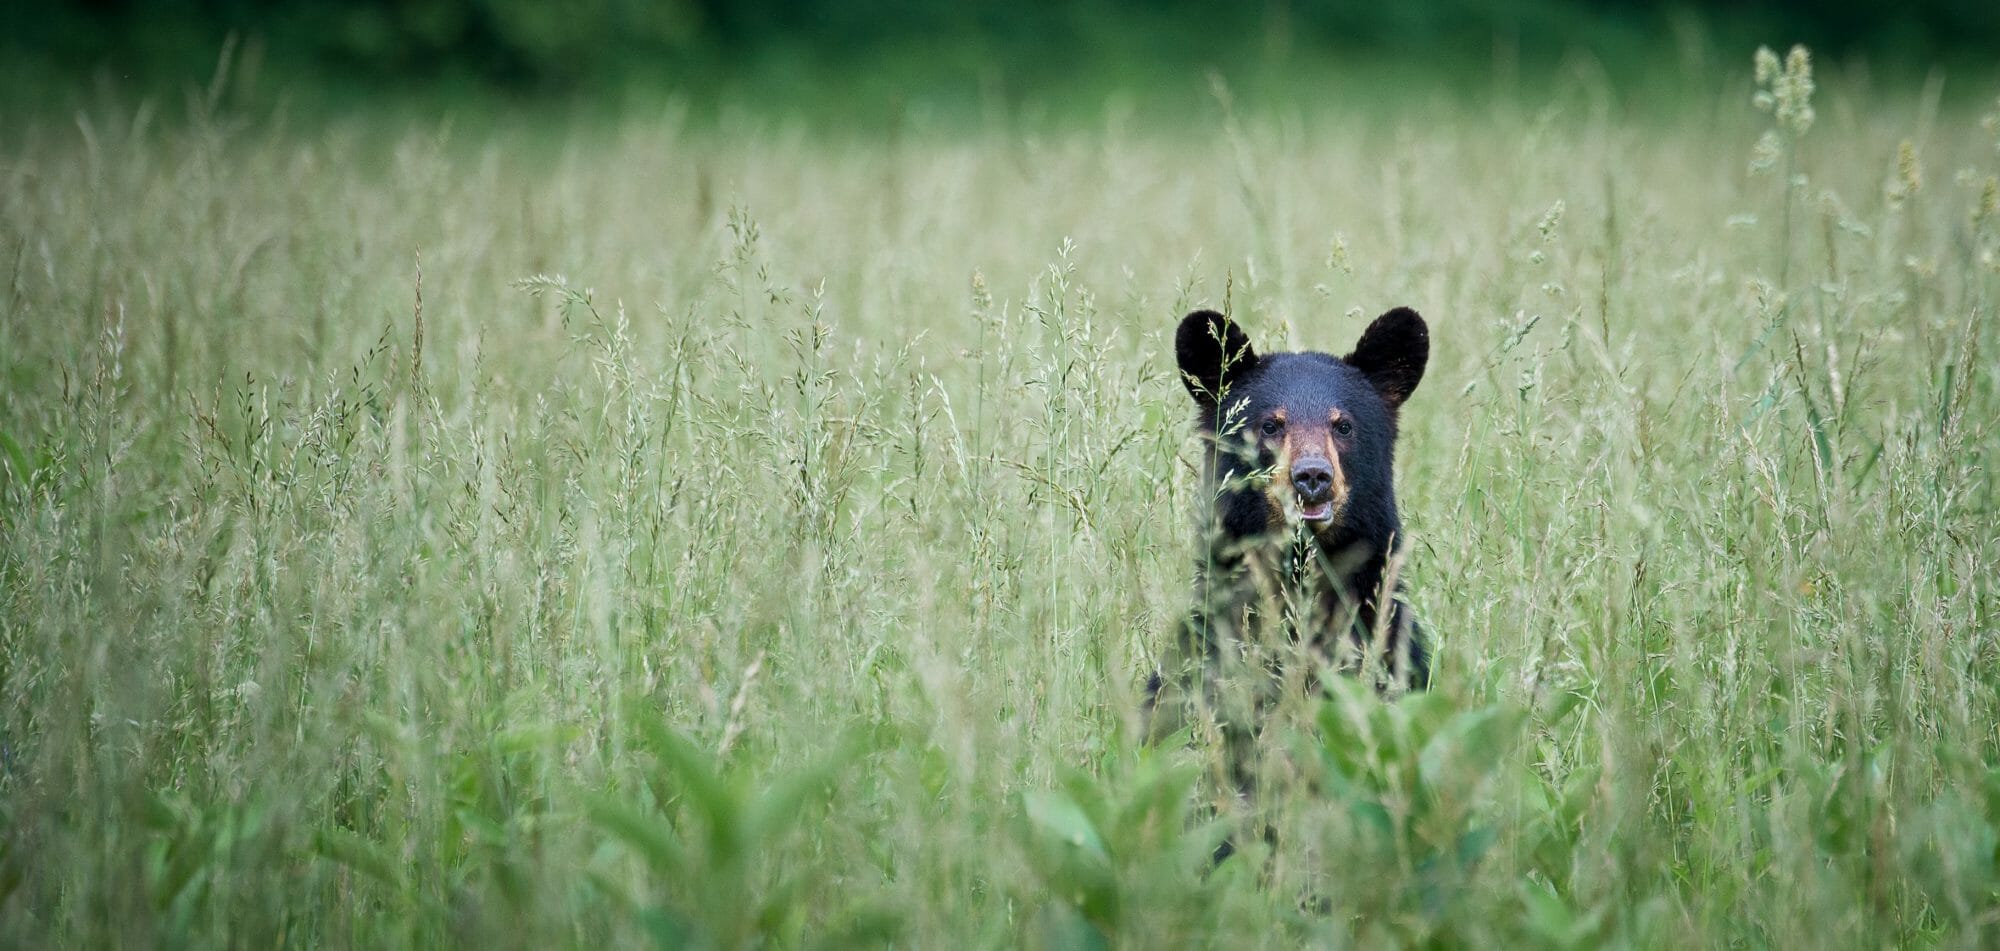 A black bear head stands out above a field of grass